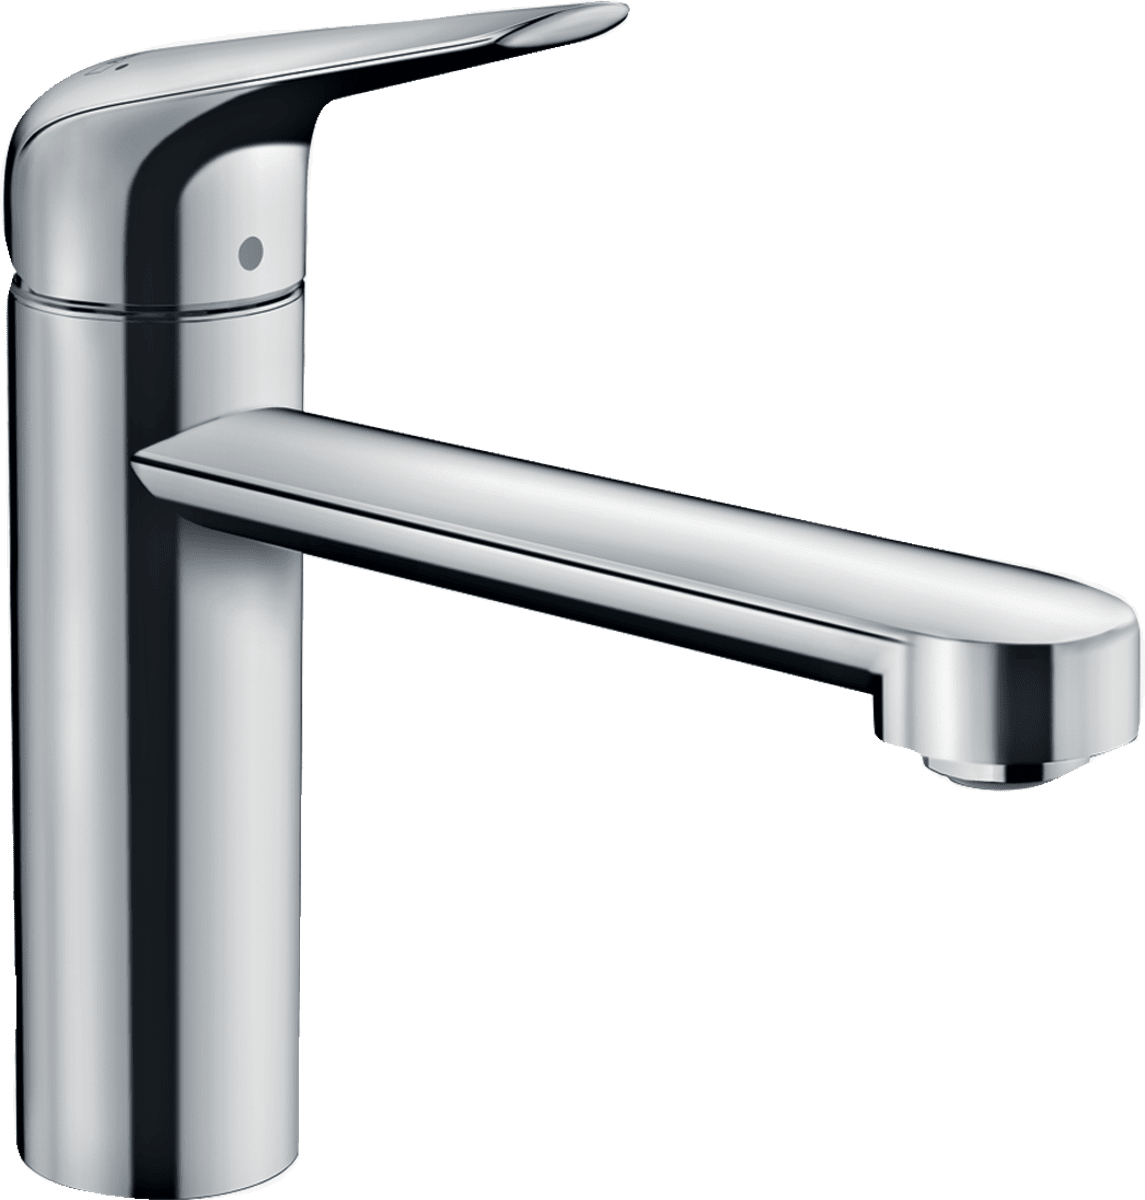 Picture of HANSGROHE Focus M42 Single lever kitchen mixer 120, CoolStart, EcoSelection, 1jet #71805000 - Chrome